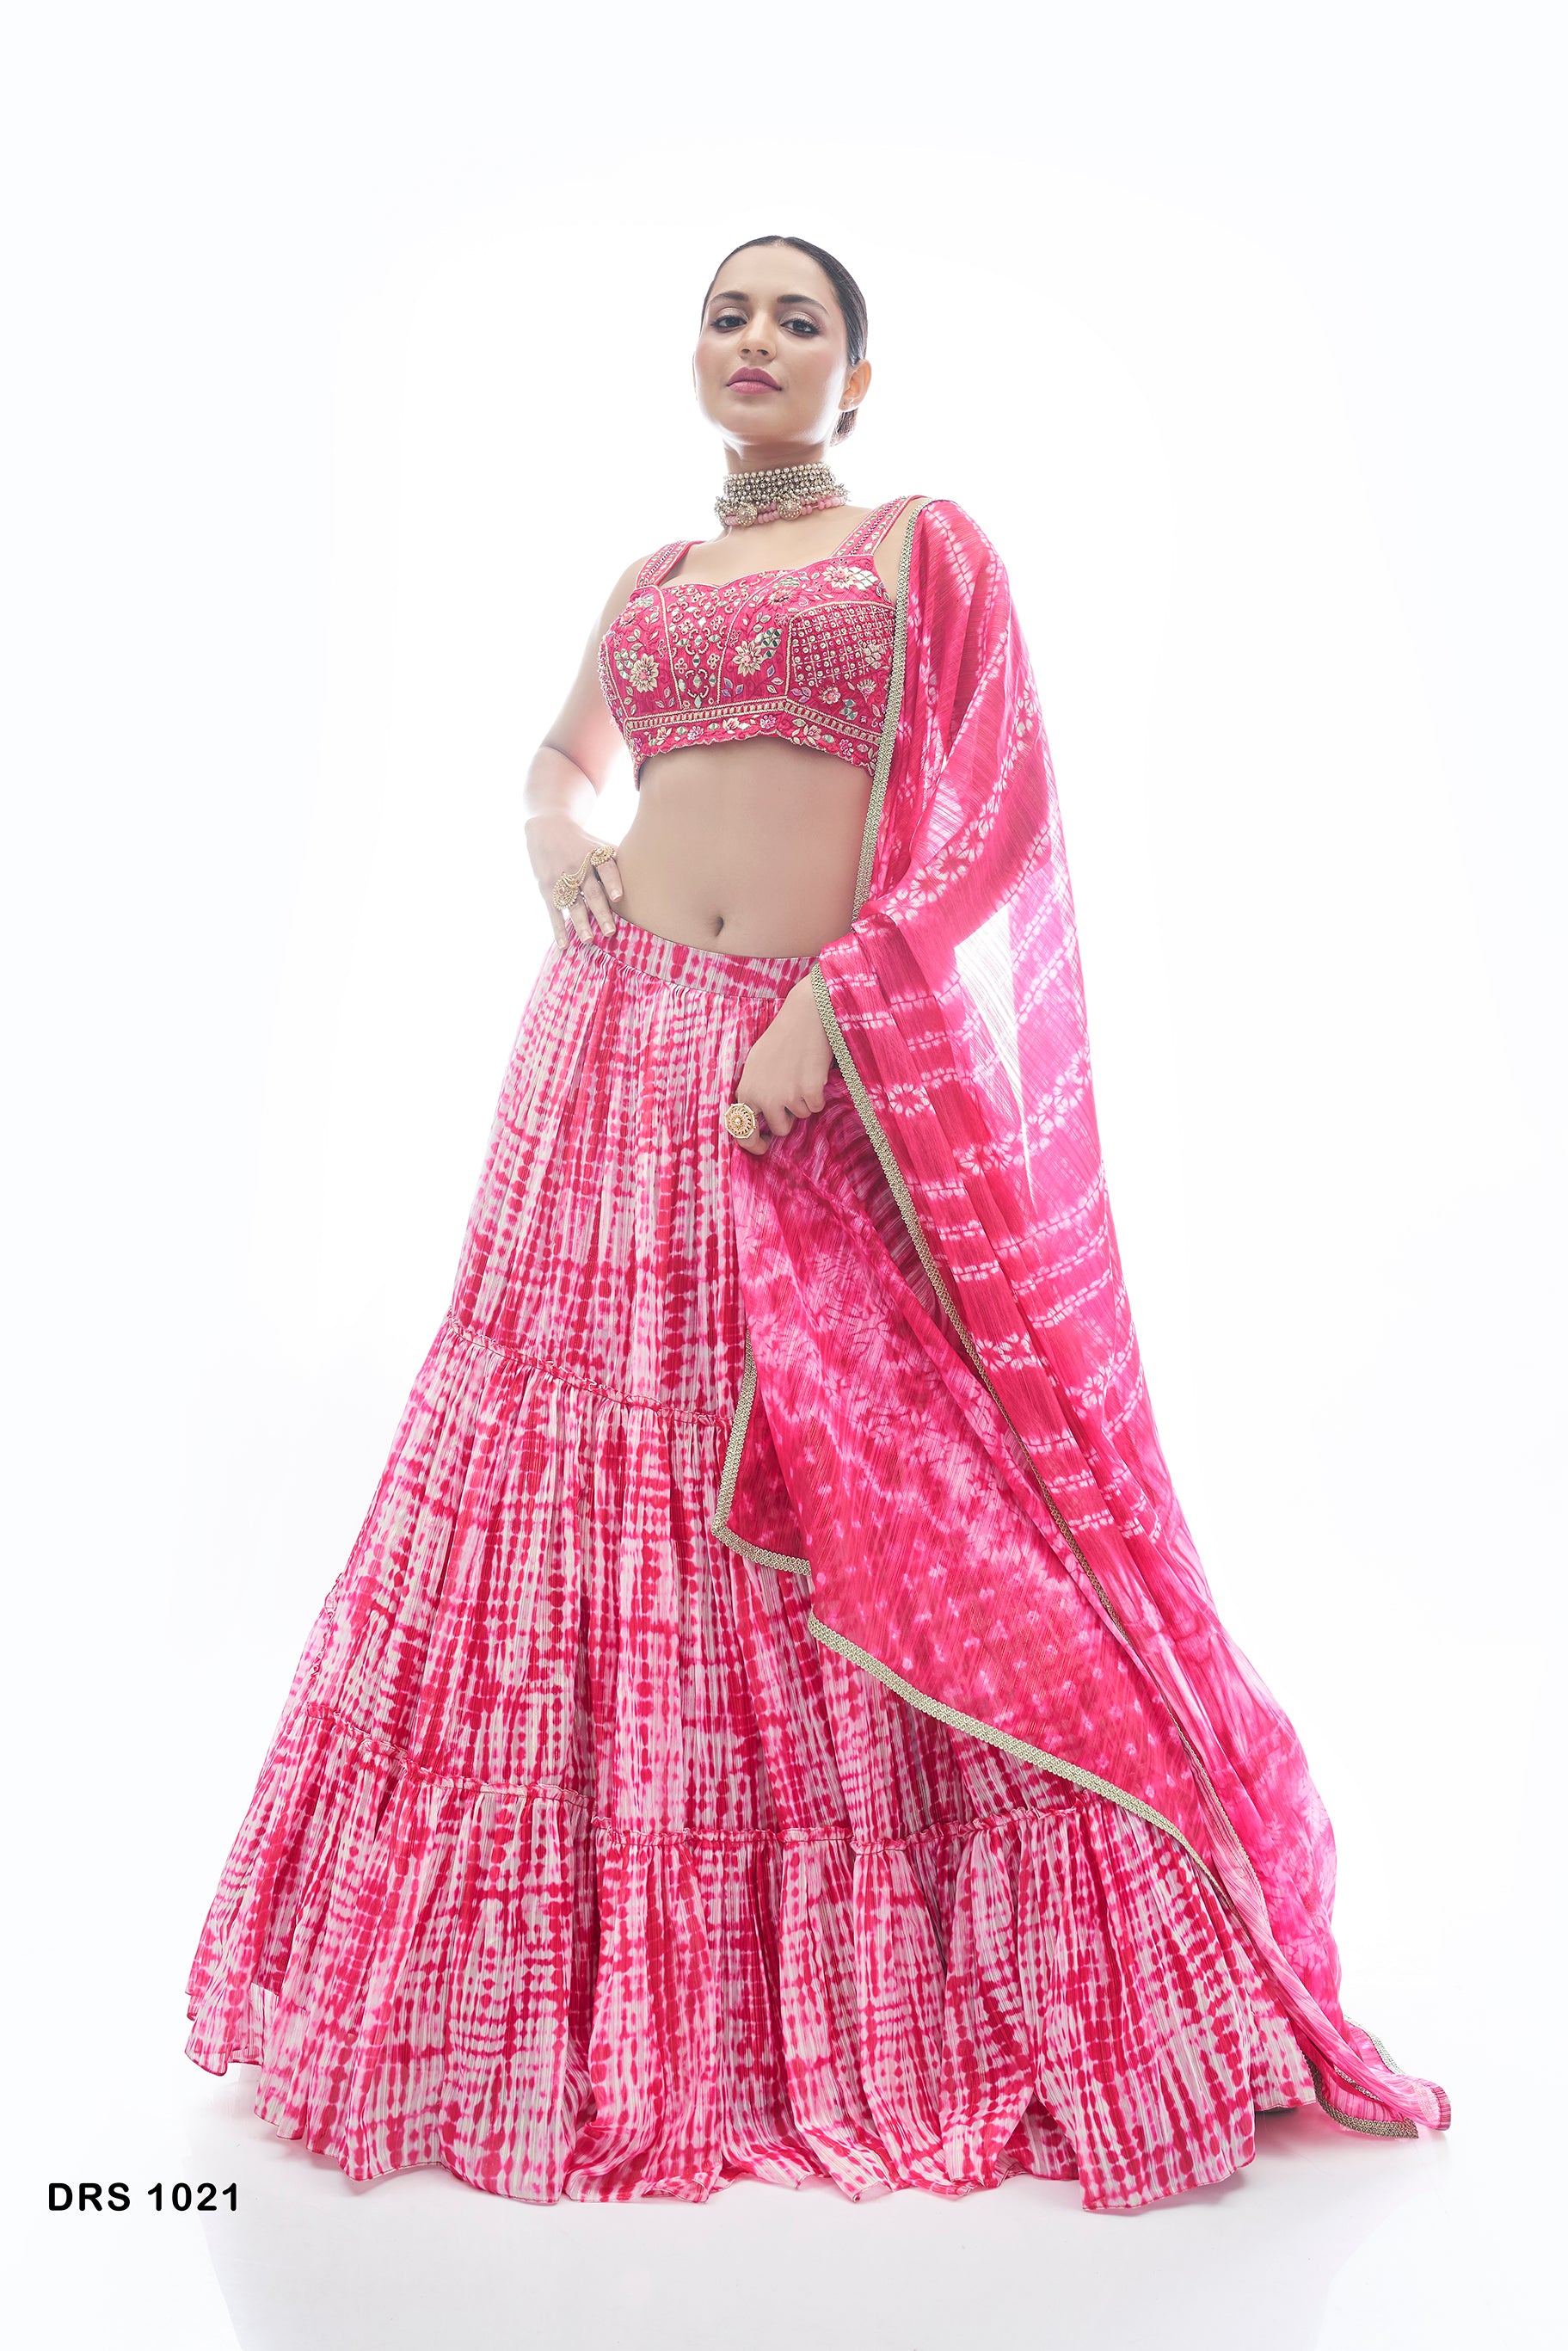 Utsav Fashion Women's Lehenga Style Embroidered Net Saree in Magenta and  Red in Solapur at best price by Zaib Rafat Garments Pvt Ltd - Justdial